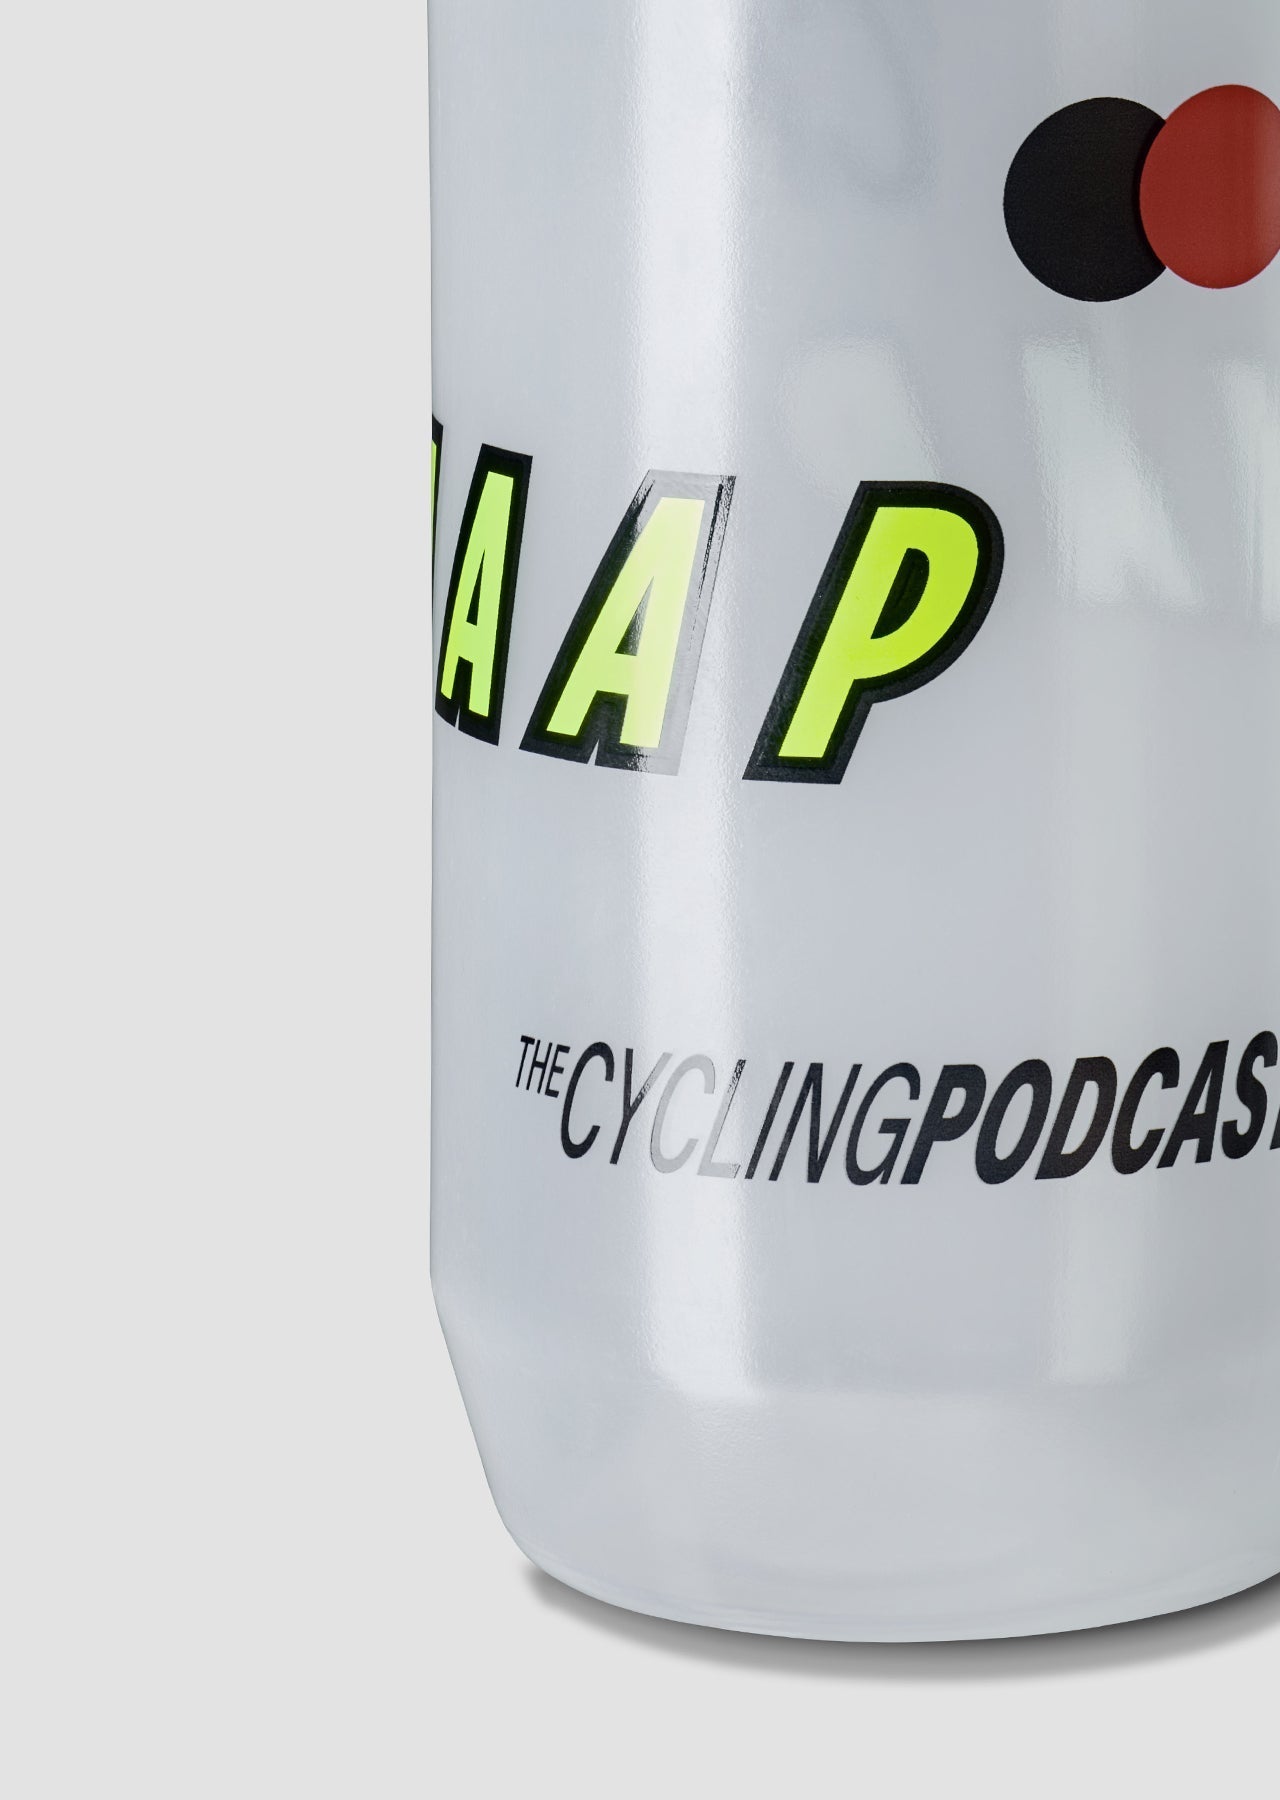 The Cycling Podcast Bottle